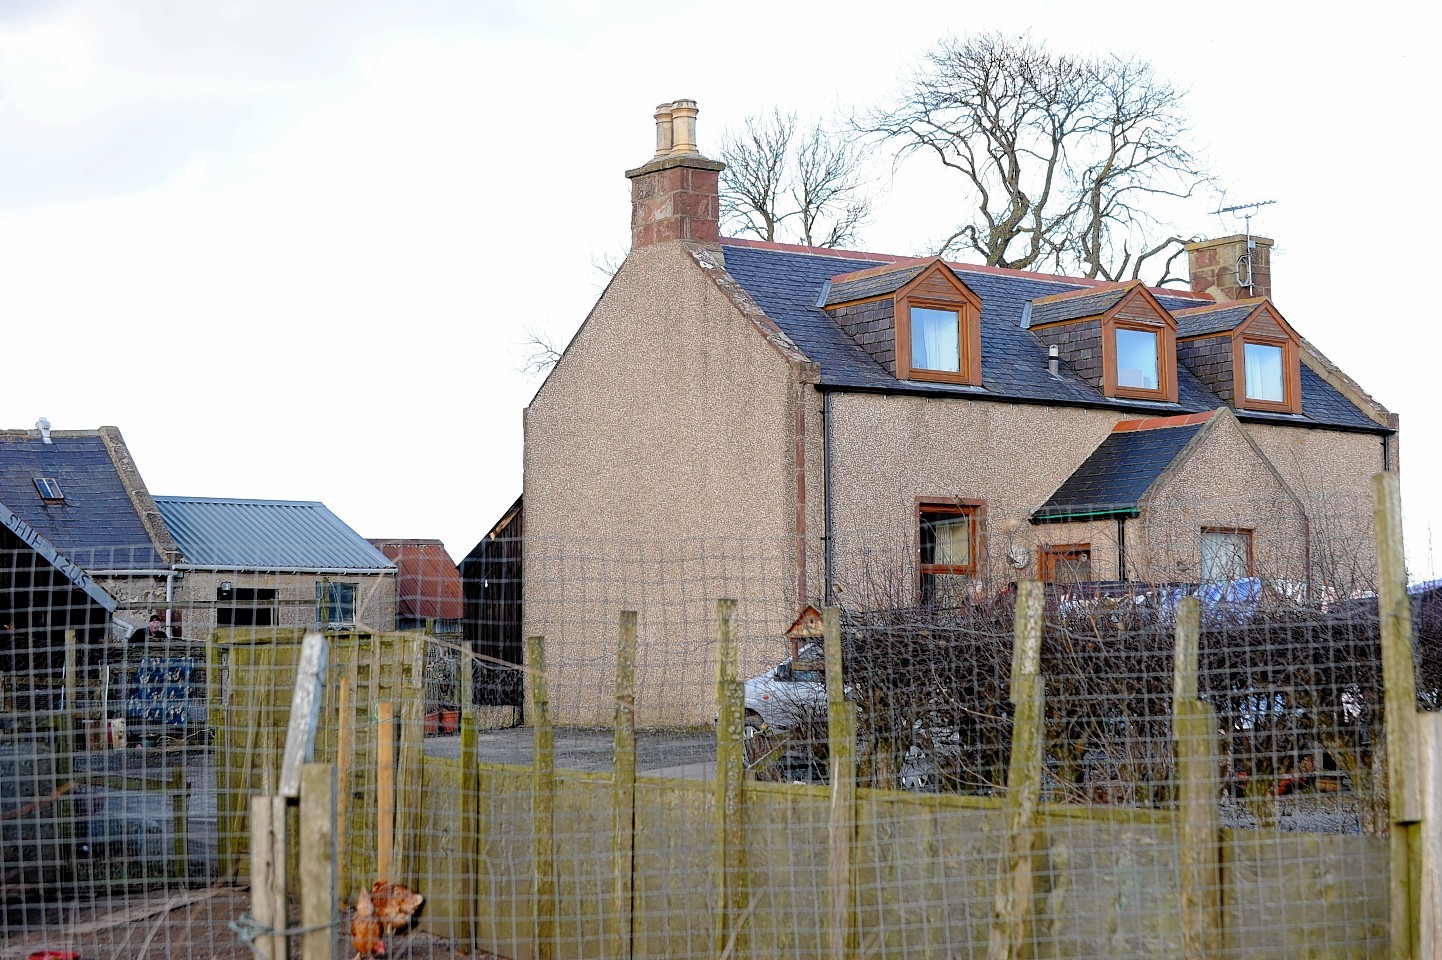 The house near Fyvie where the fire took place